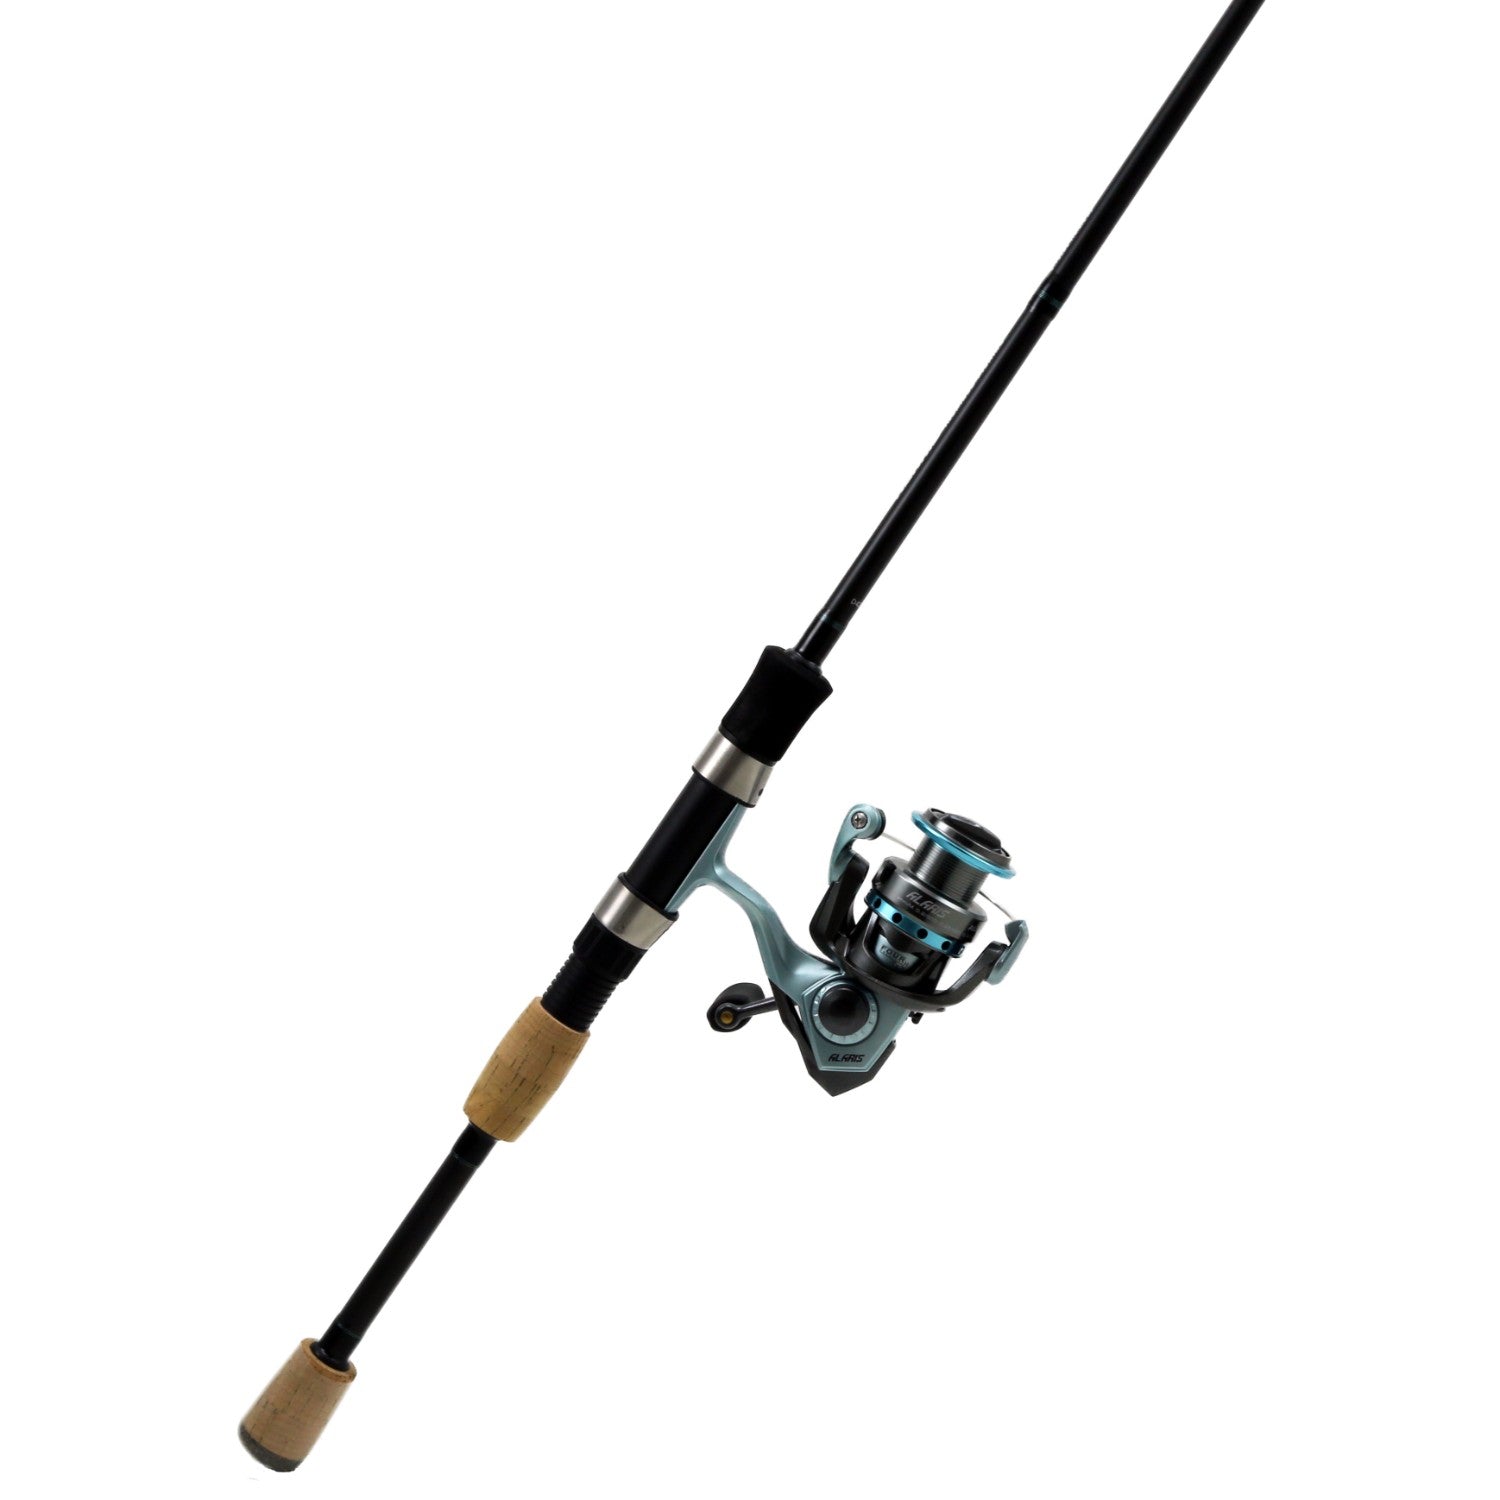 13 Fishing Code Silver 7 ft M Spinning Combo 3000 Size Reel